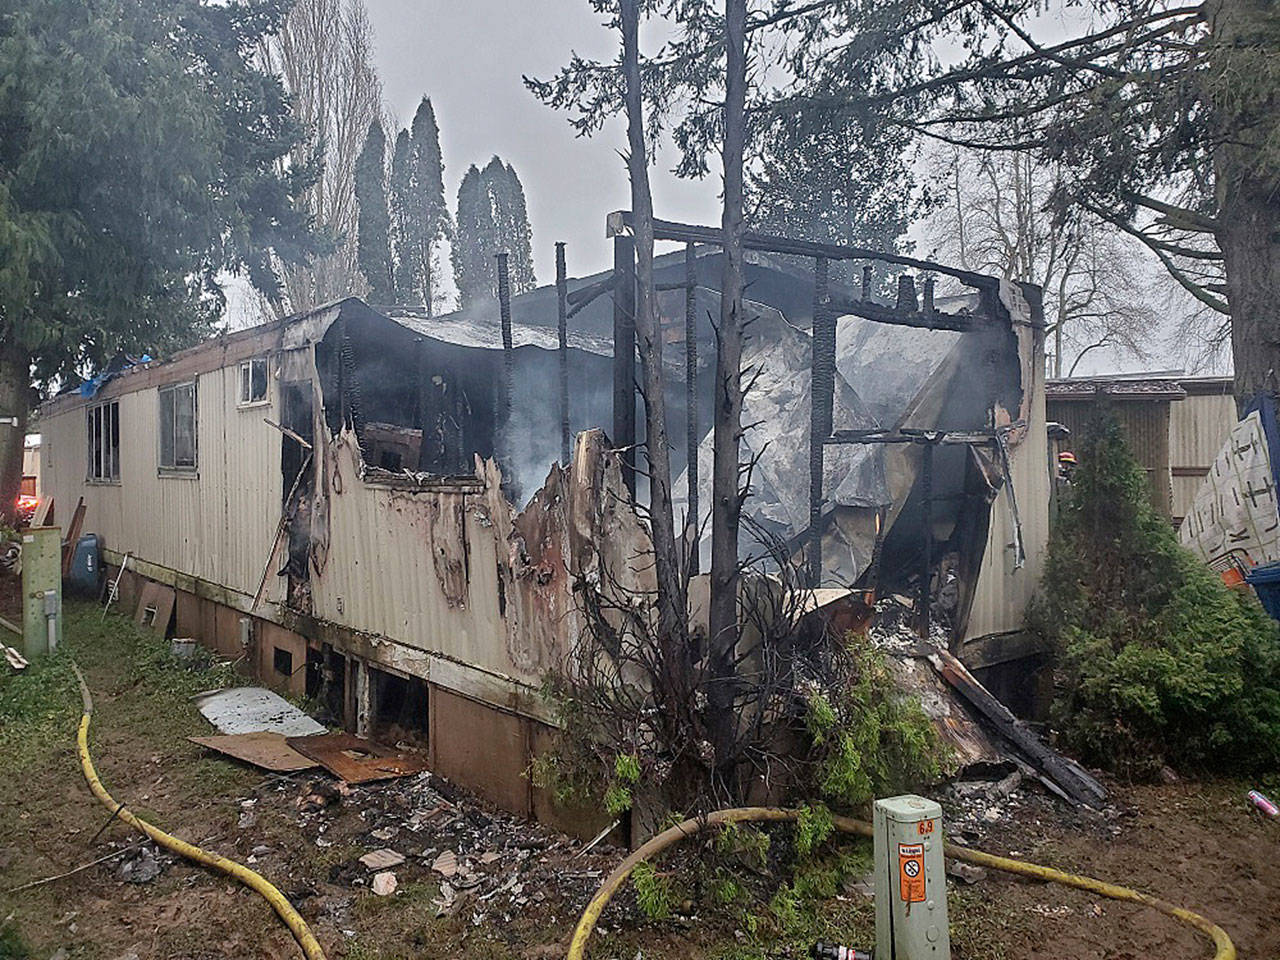 A husband and wife died Monday in a fire at the Circle K Mobile Home Park in the 800 block of the West Valley Highway. COURTESY PHOTO, Puget Sound Fire